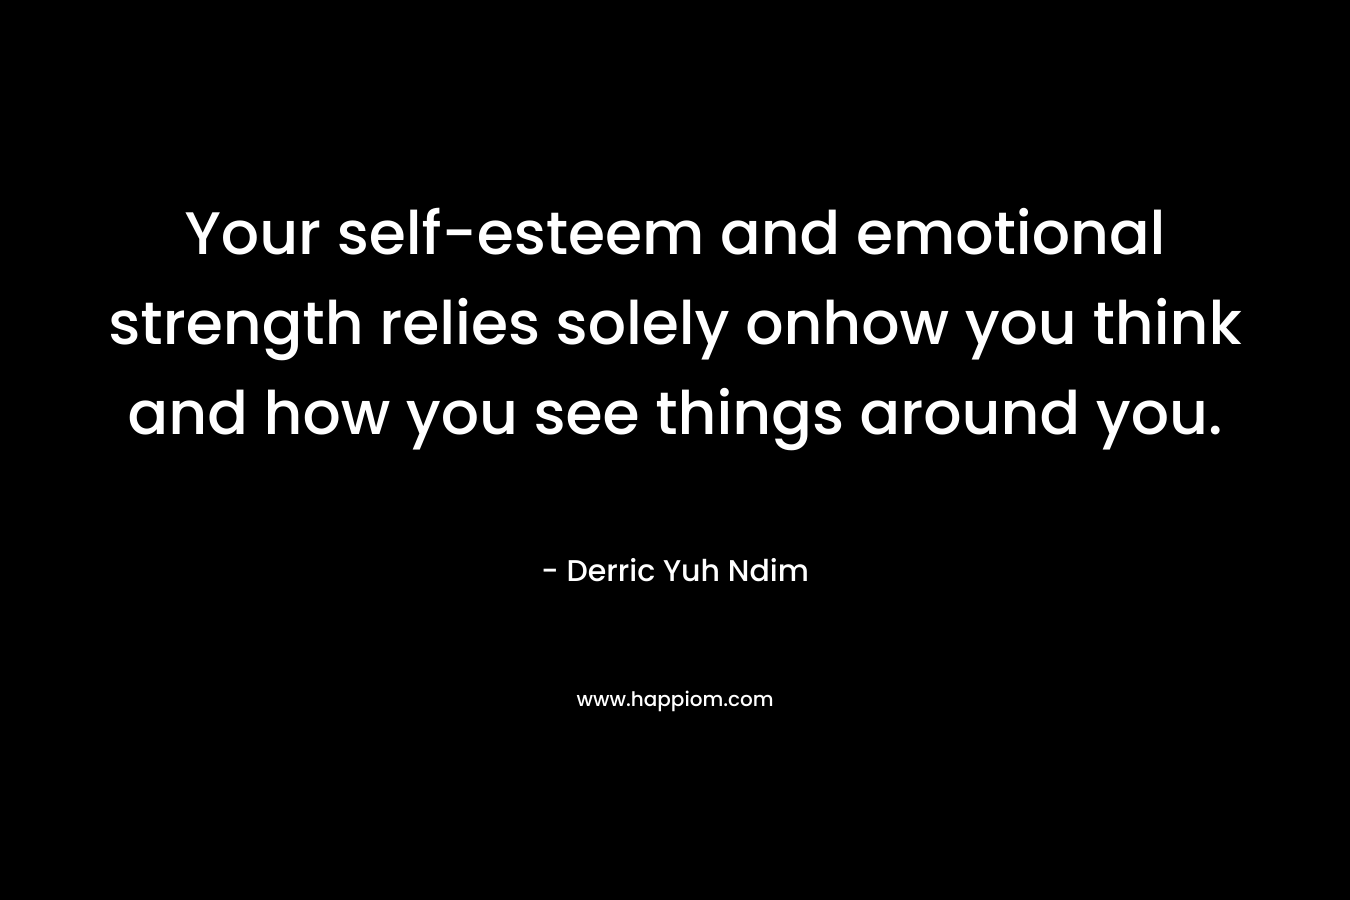 Your self-esteem and emotional strength relies solely onhow you think and how you see things around you.